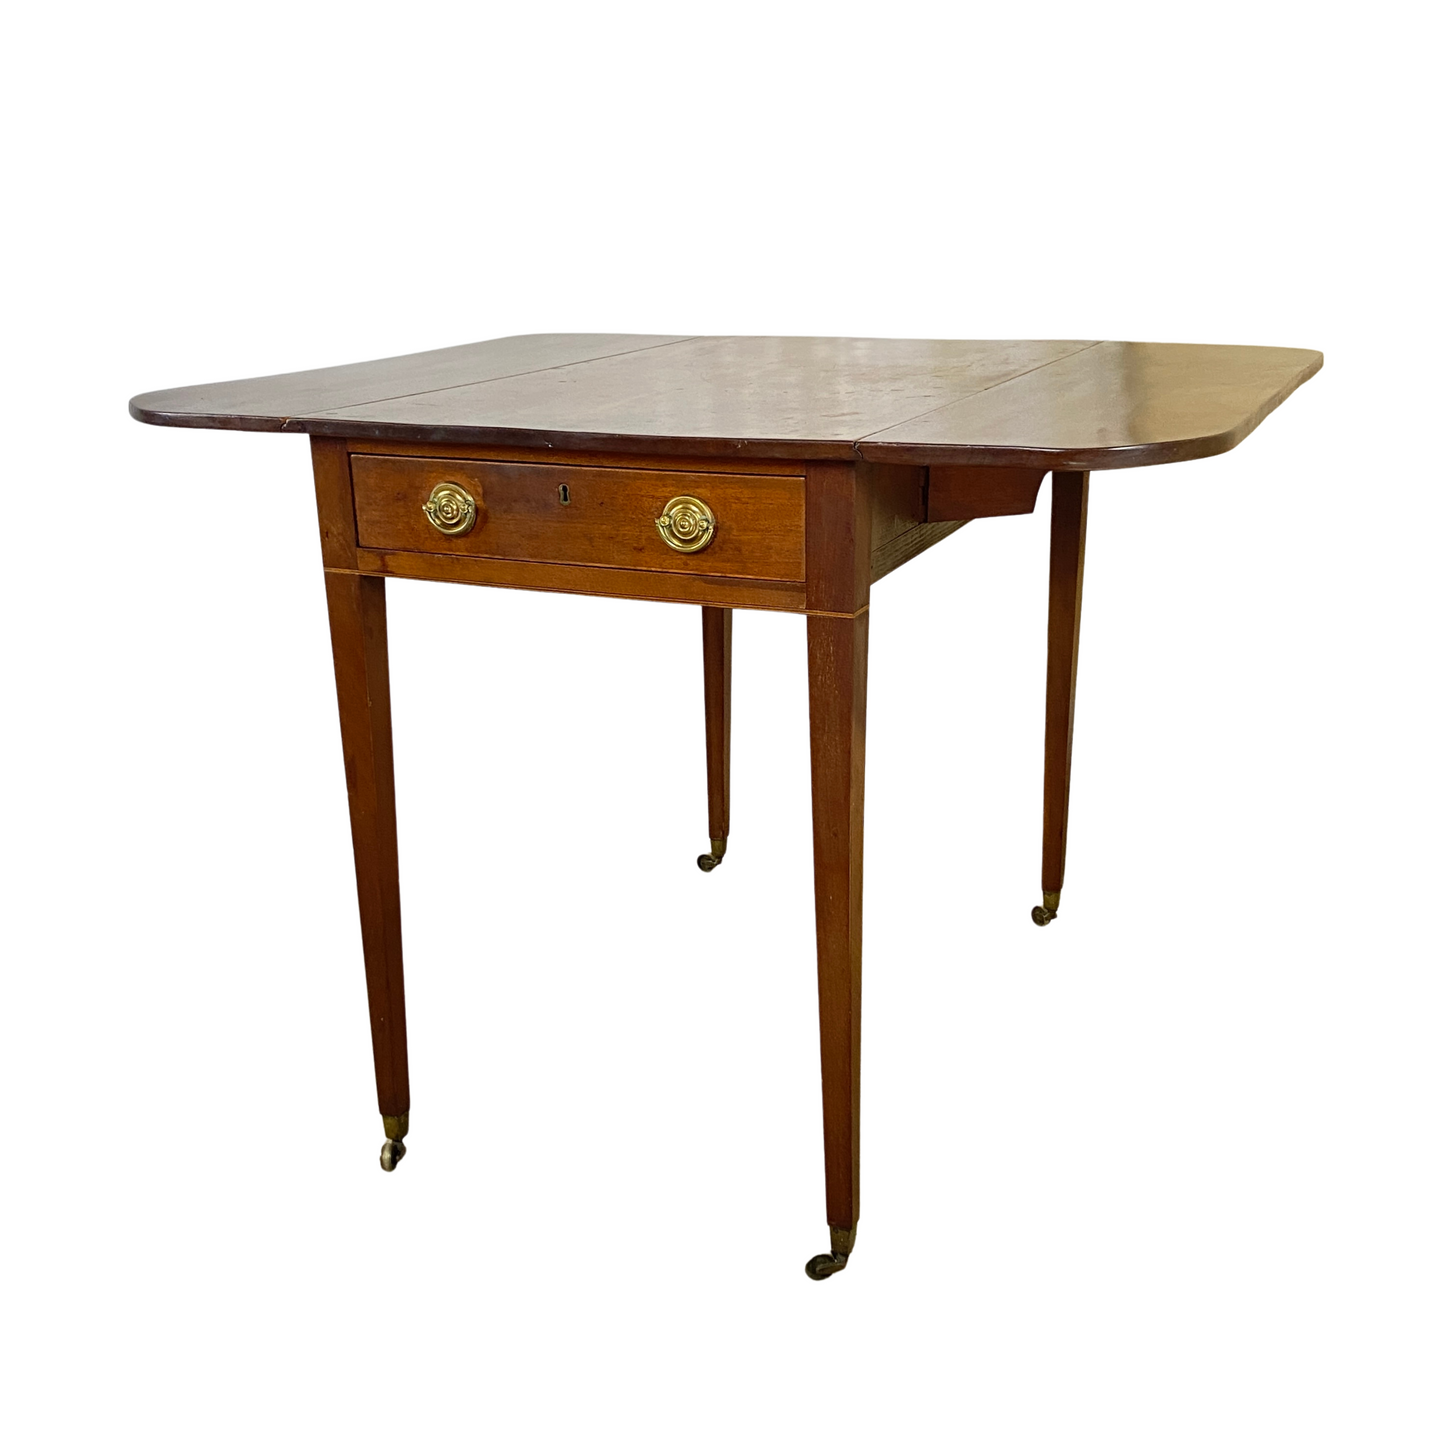 Antique Early 19th C. Inlaid Mahogany Pembroke Table